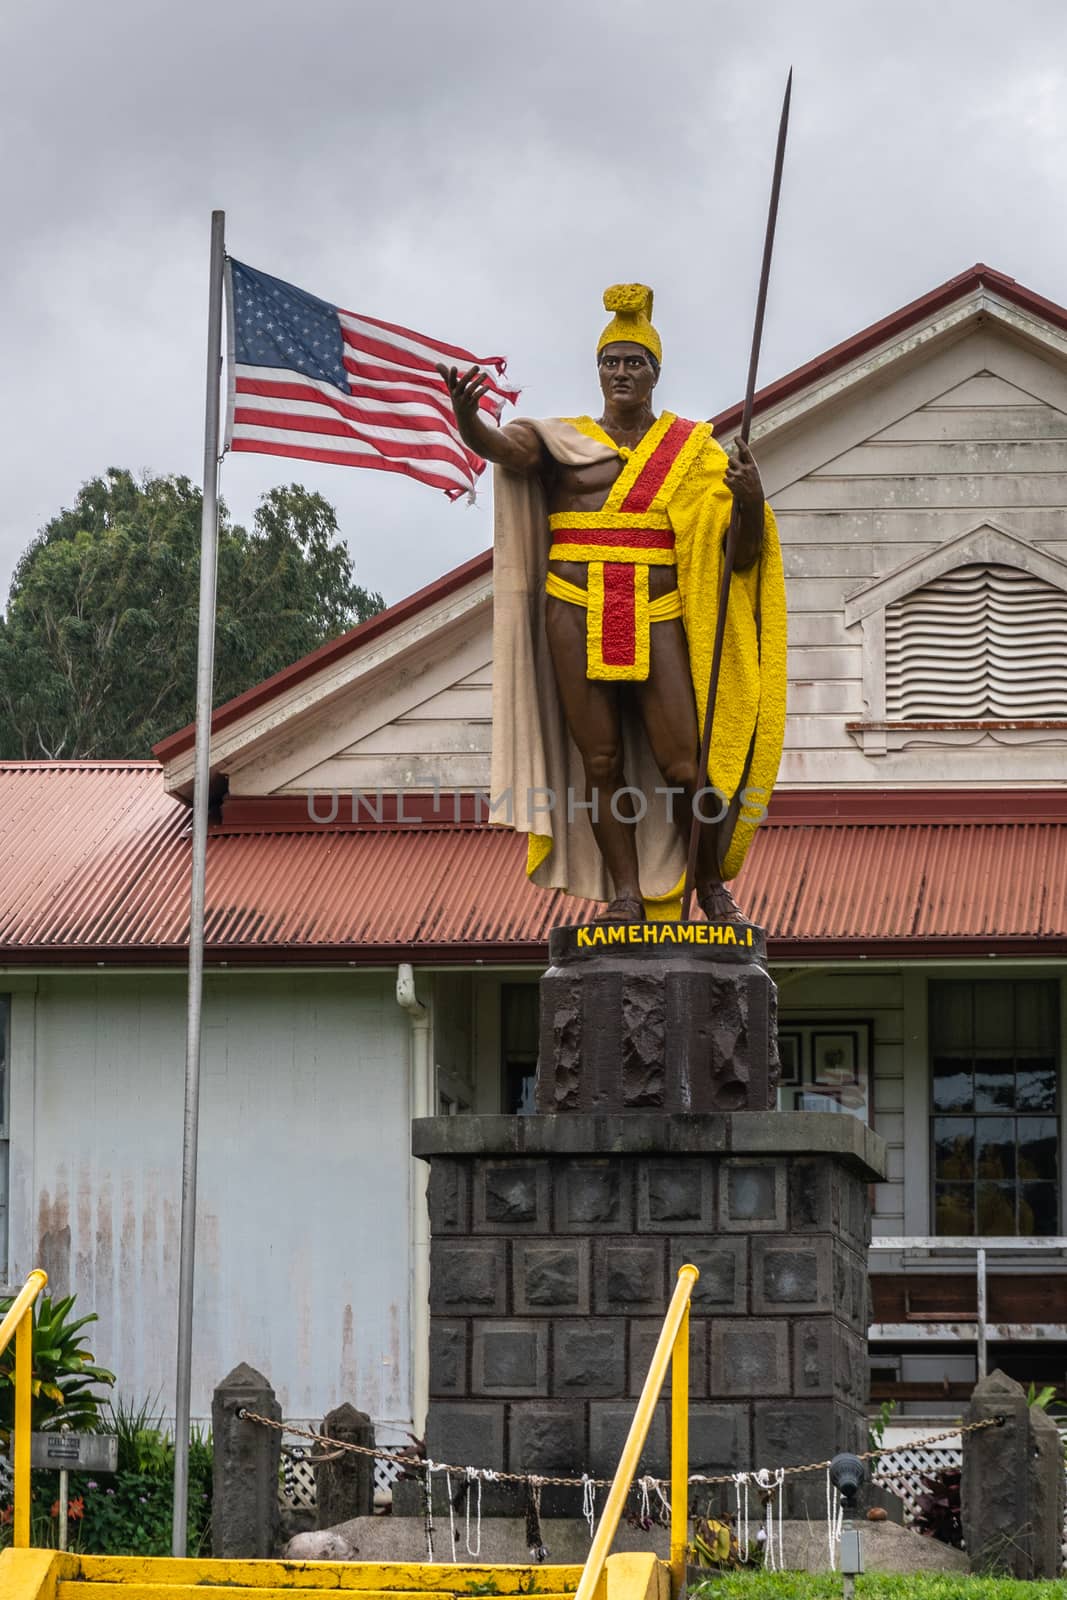 Kapaau, Hawaii, USA. - January 15, 2020: Statue of King Kamehameha, decorated with yellow and red dress, golden crown and long spear under gray cloudscape with USA flag behind.